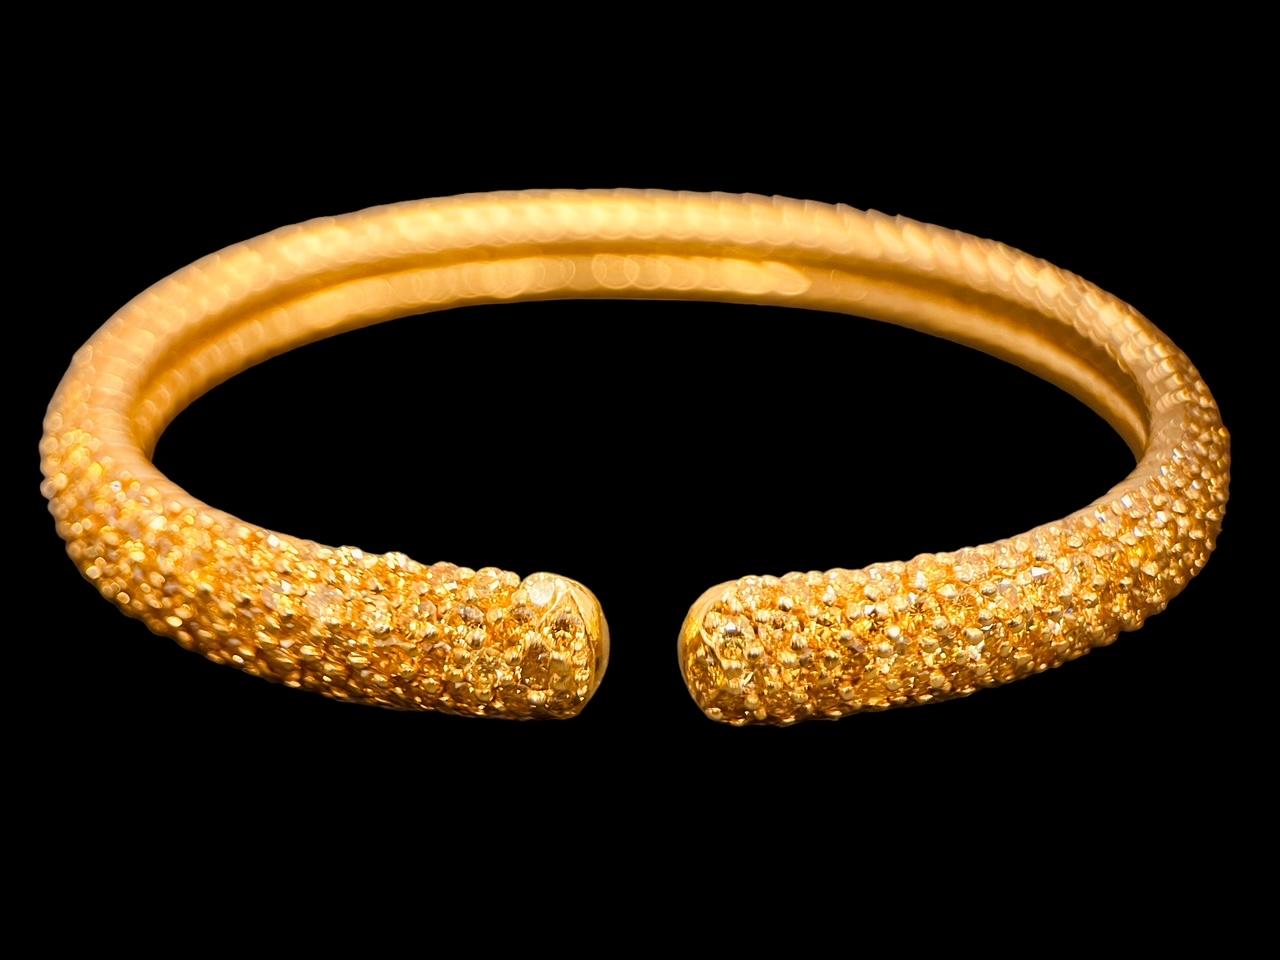 A 12 Carats Pave' Set Fancy Yellow Diamond Bangle, 9mm Width For Sale 3